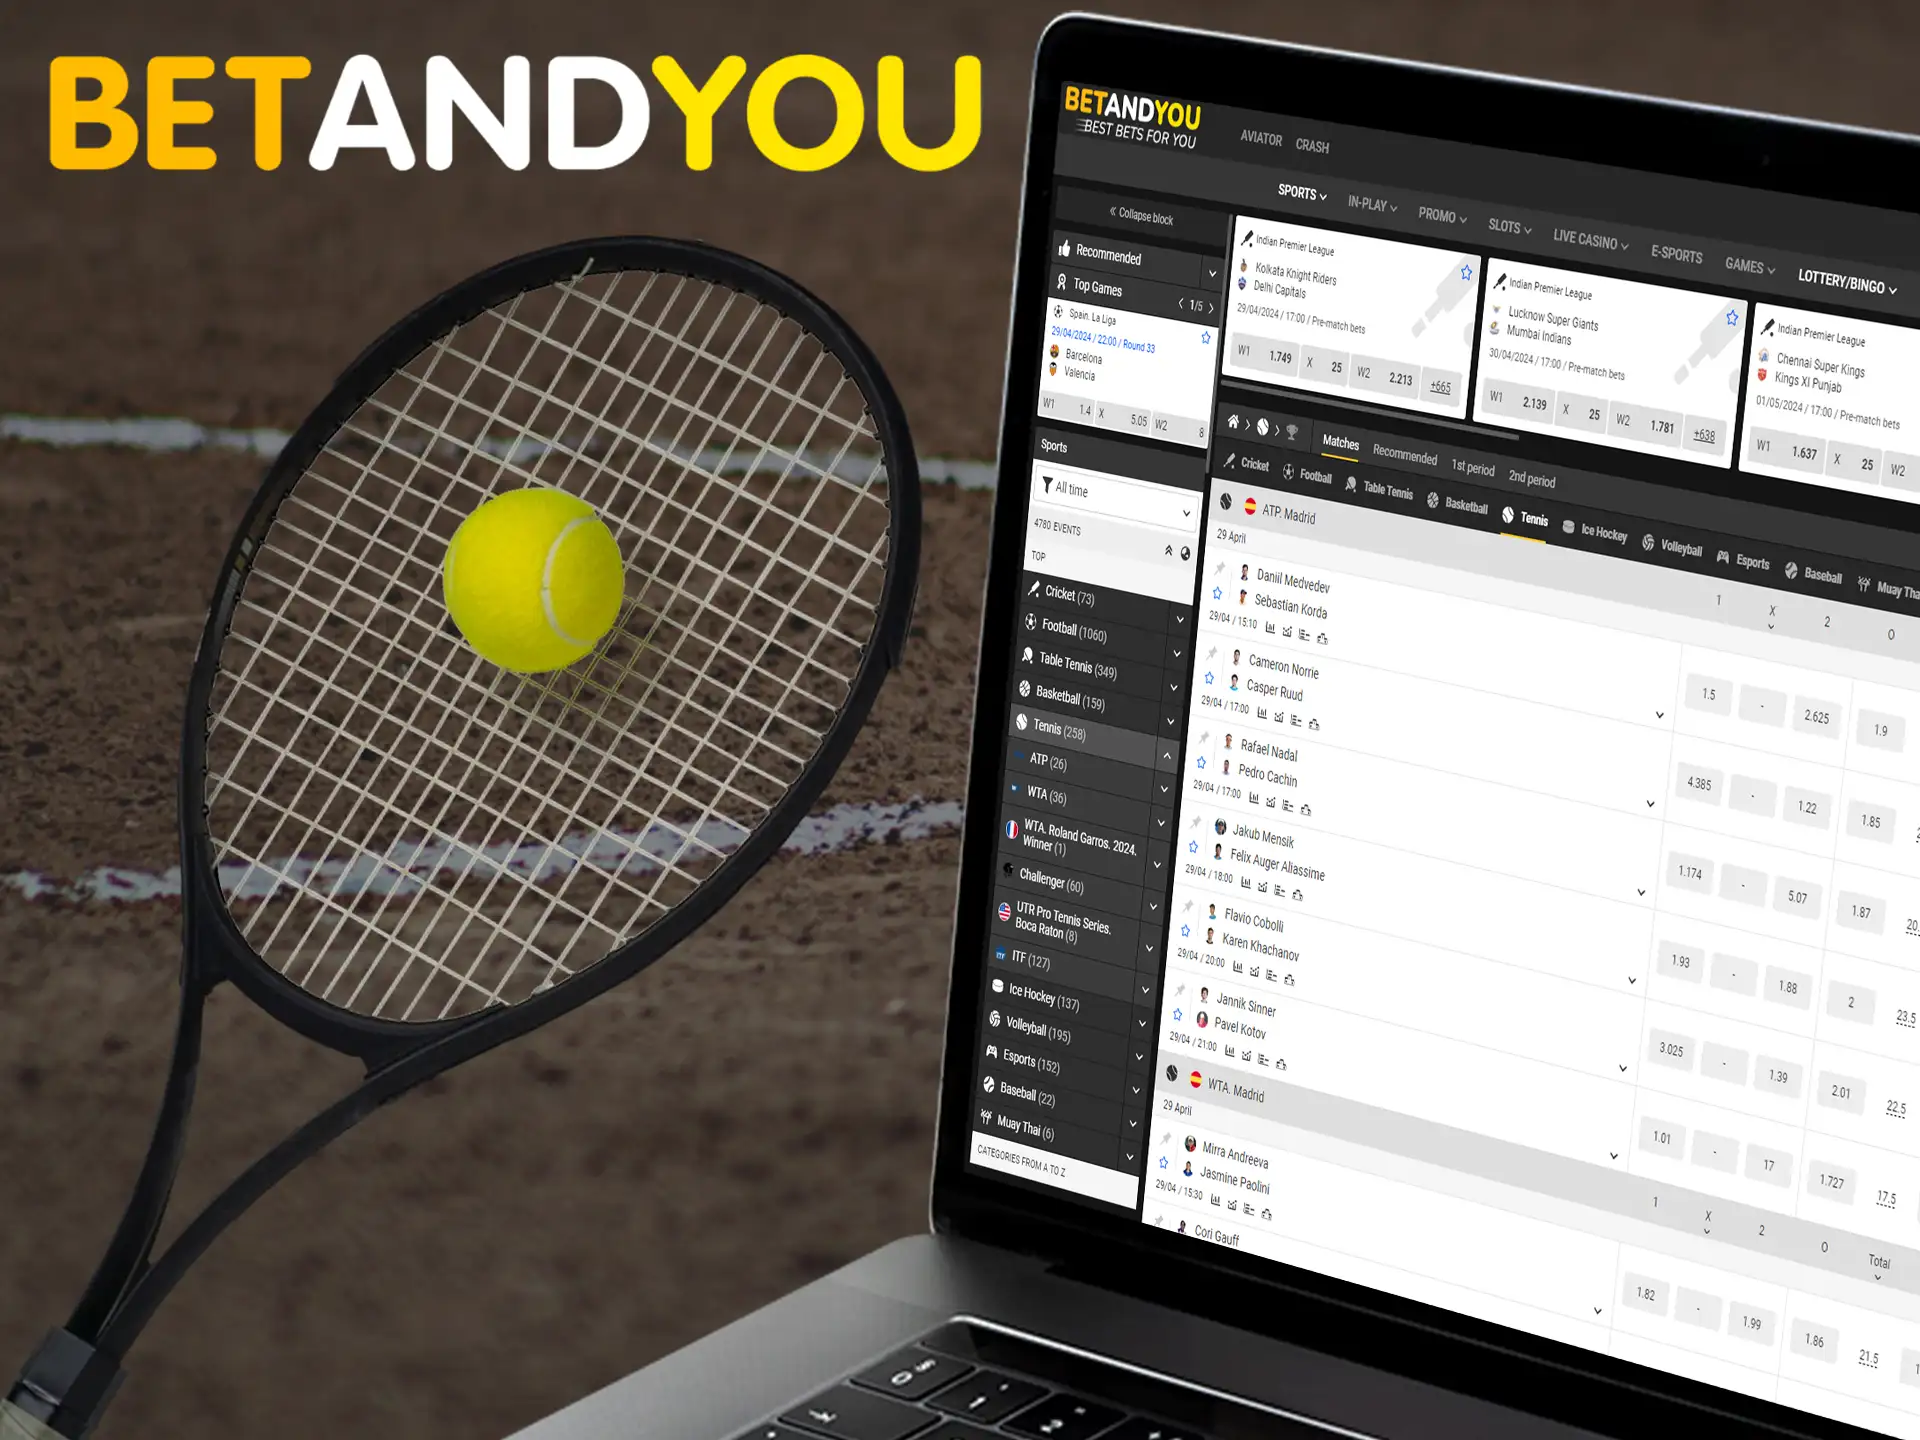 On the Betandyou bookmaker website, players can find a large number of tennis matches.